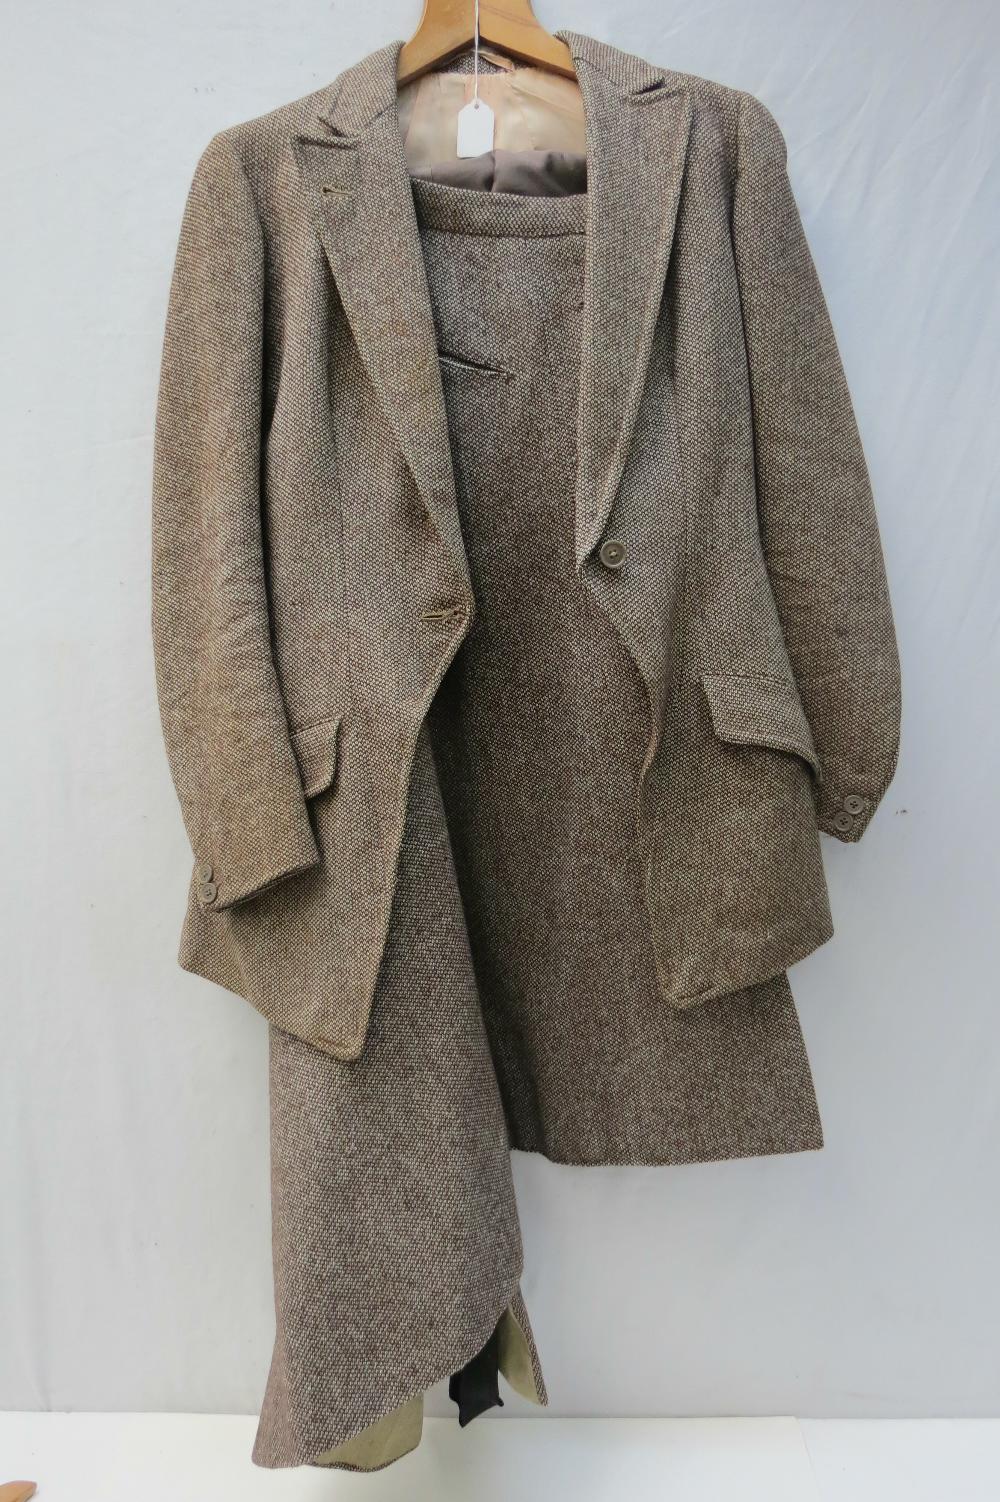 A ladies ratcatcher tweed riding coat and side saddle skirt by Robert Douglas (The Cripps) of New